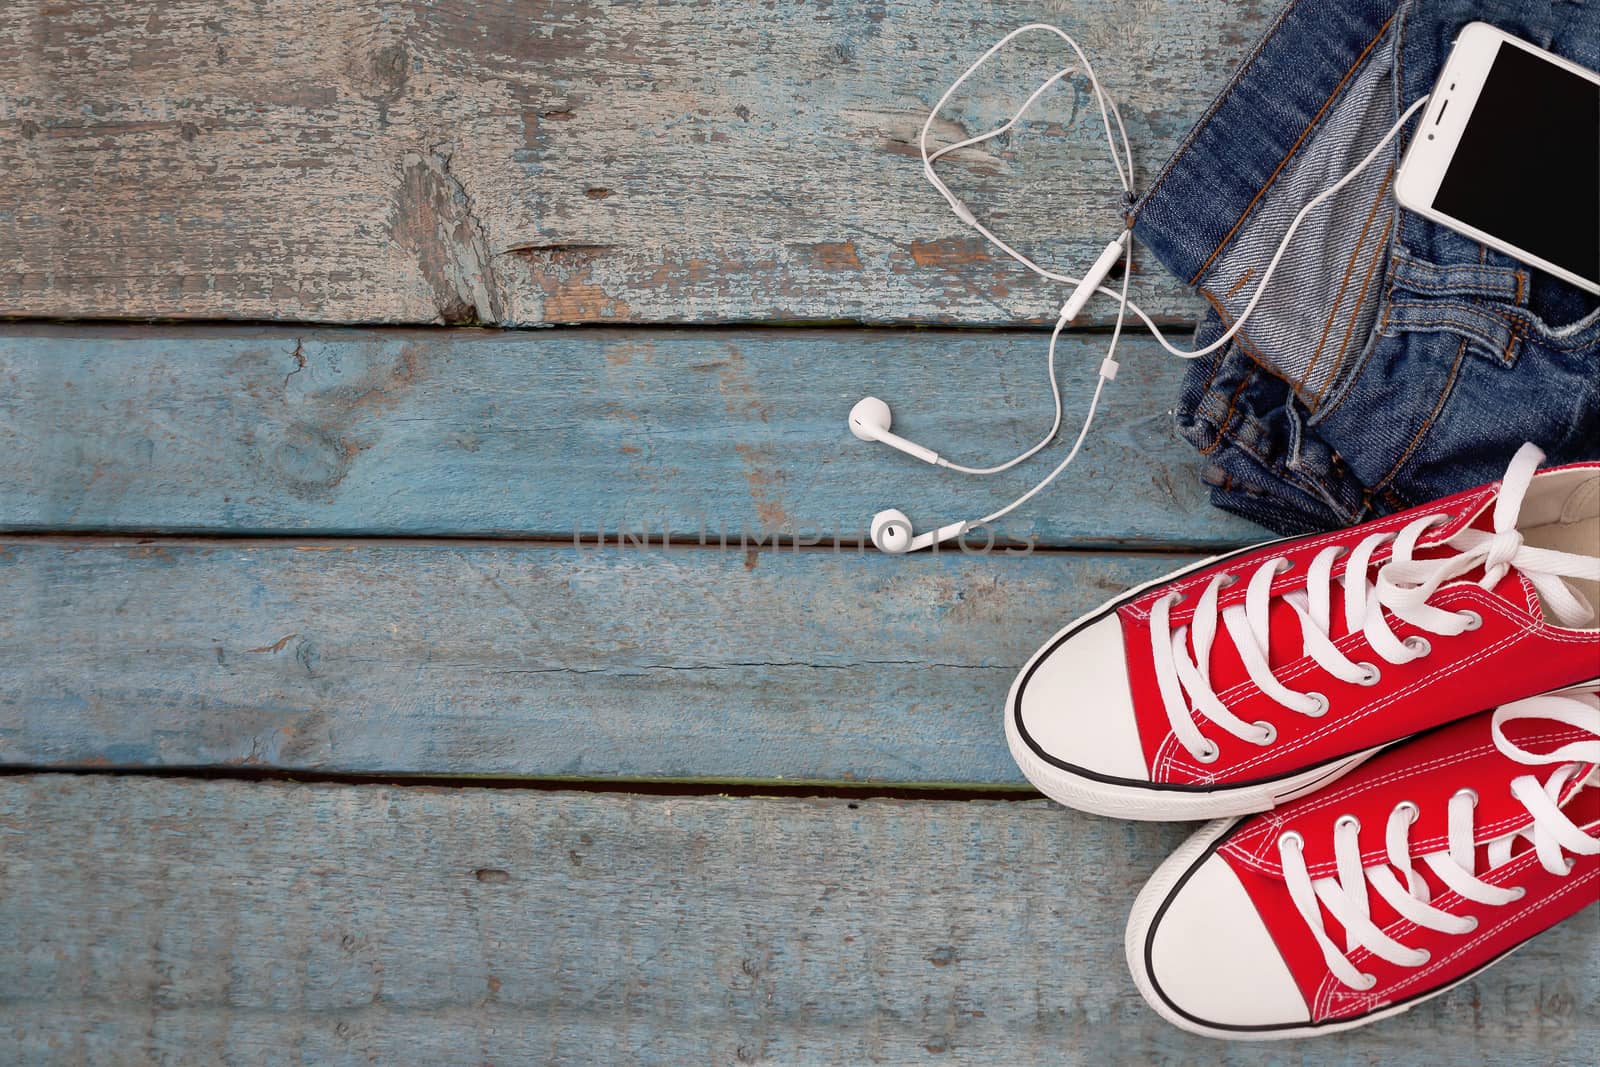 Red retro sneakers and smartphone with headset-earphones in a pocket djintsi on a blue wooden background.